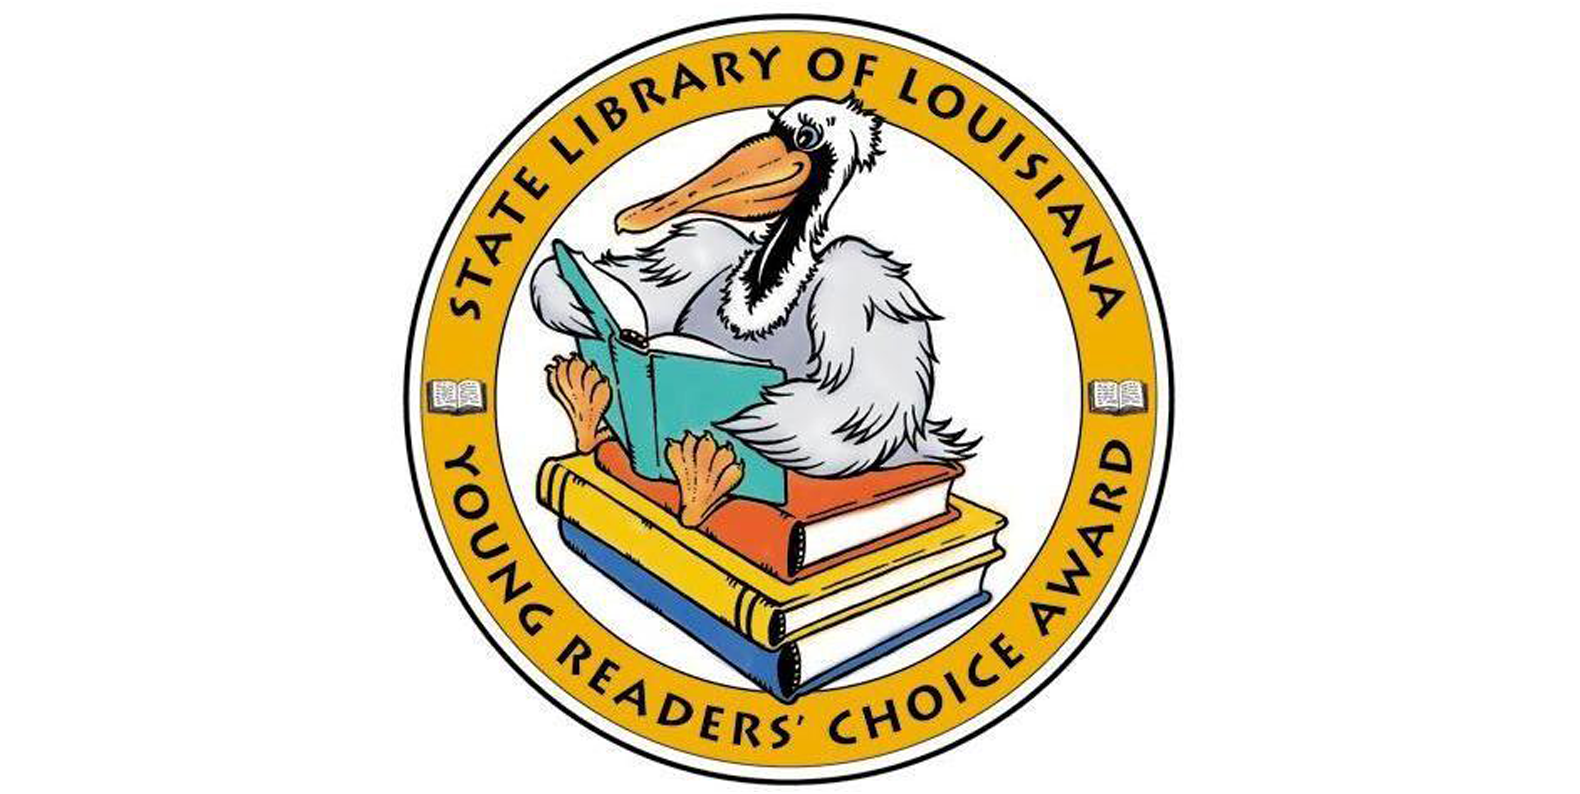 Storm Blown Nominated For The State Library of Louisiana’s Young Readers’ Choice Awards!